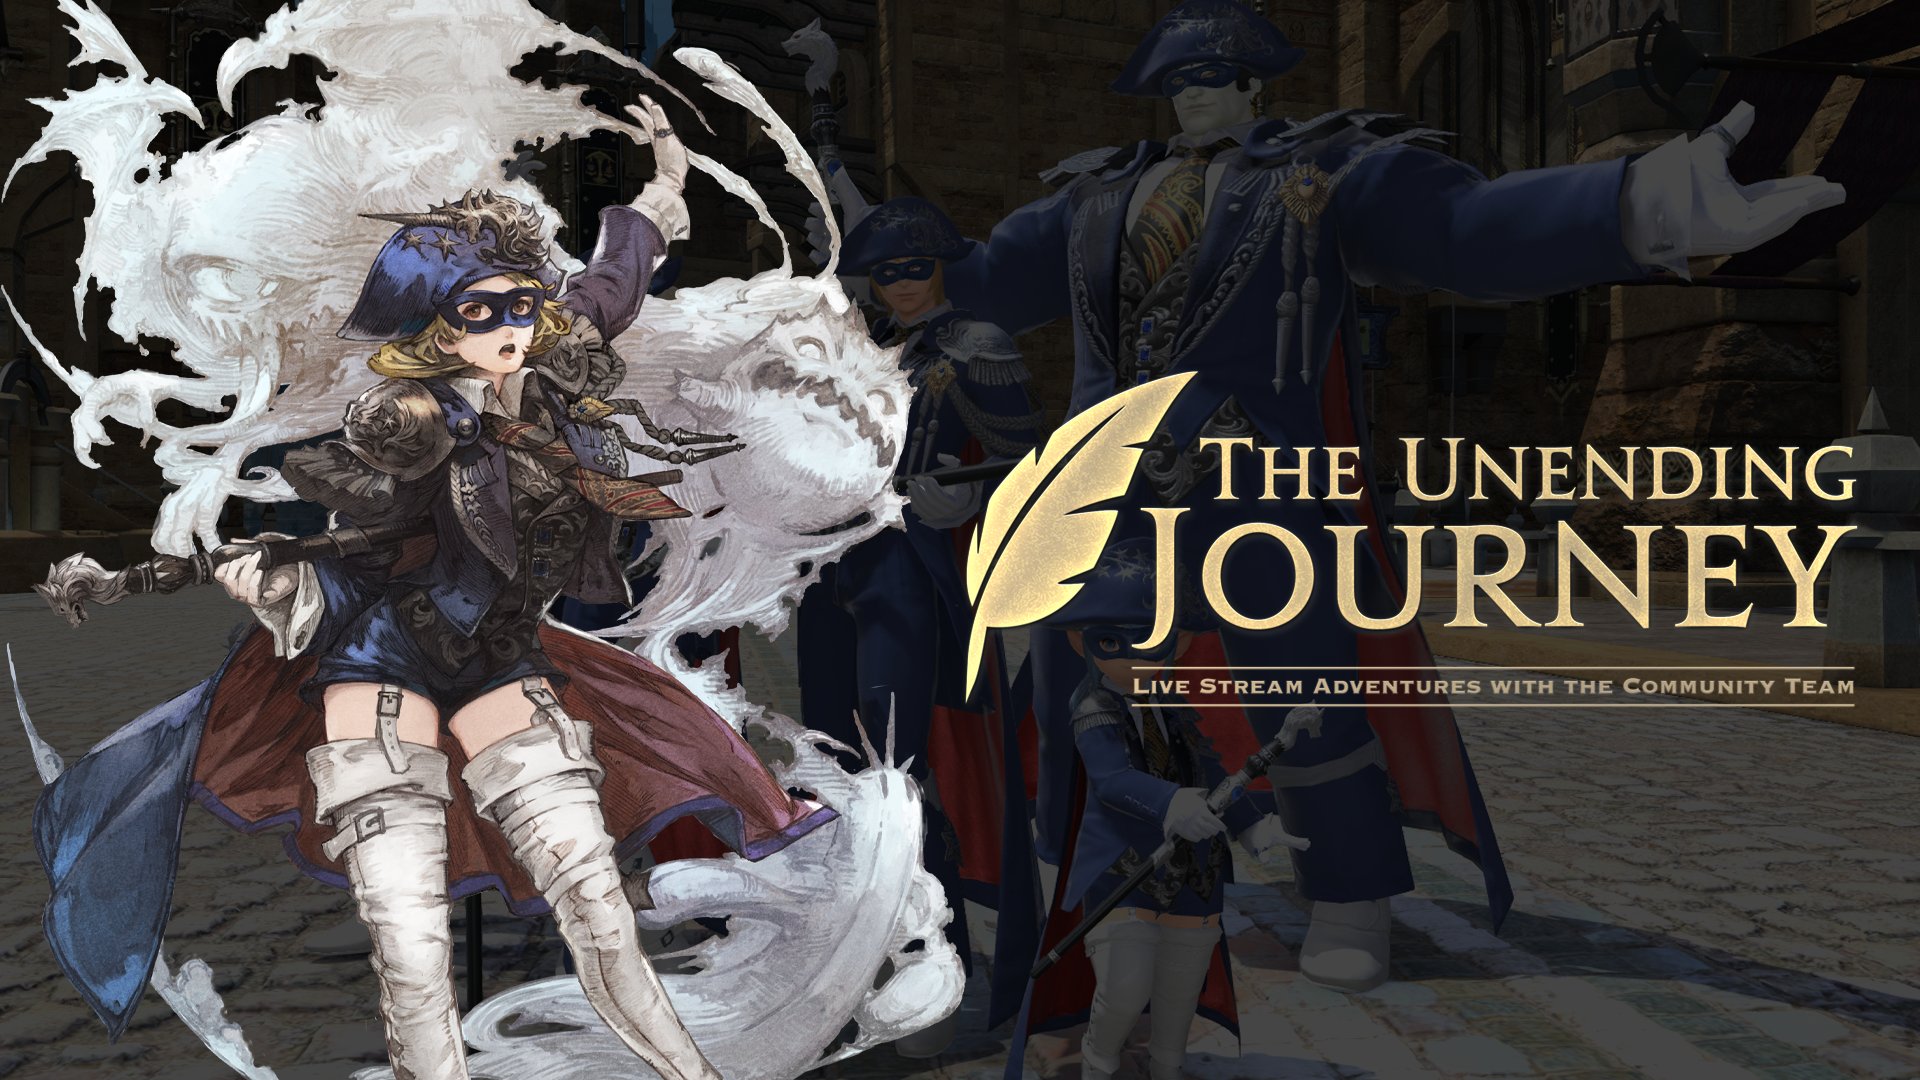 Final Fantasy Xiv The Unending Journey Is Back Join The Ffxiv Eu Community Team On Their Journey To Collect All Blu Spells The Inferno Jacket Is On The Line